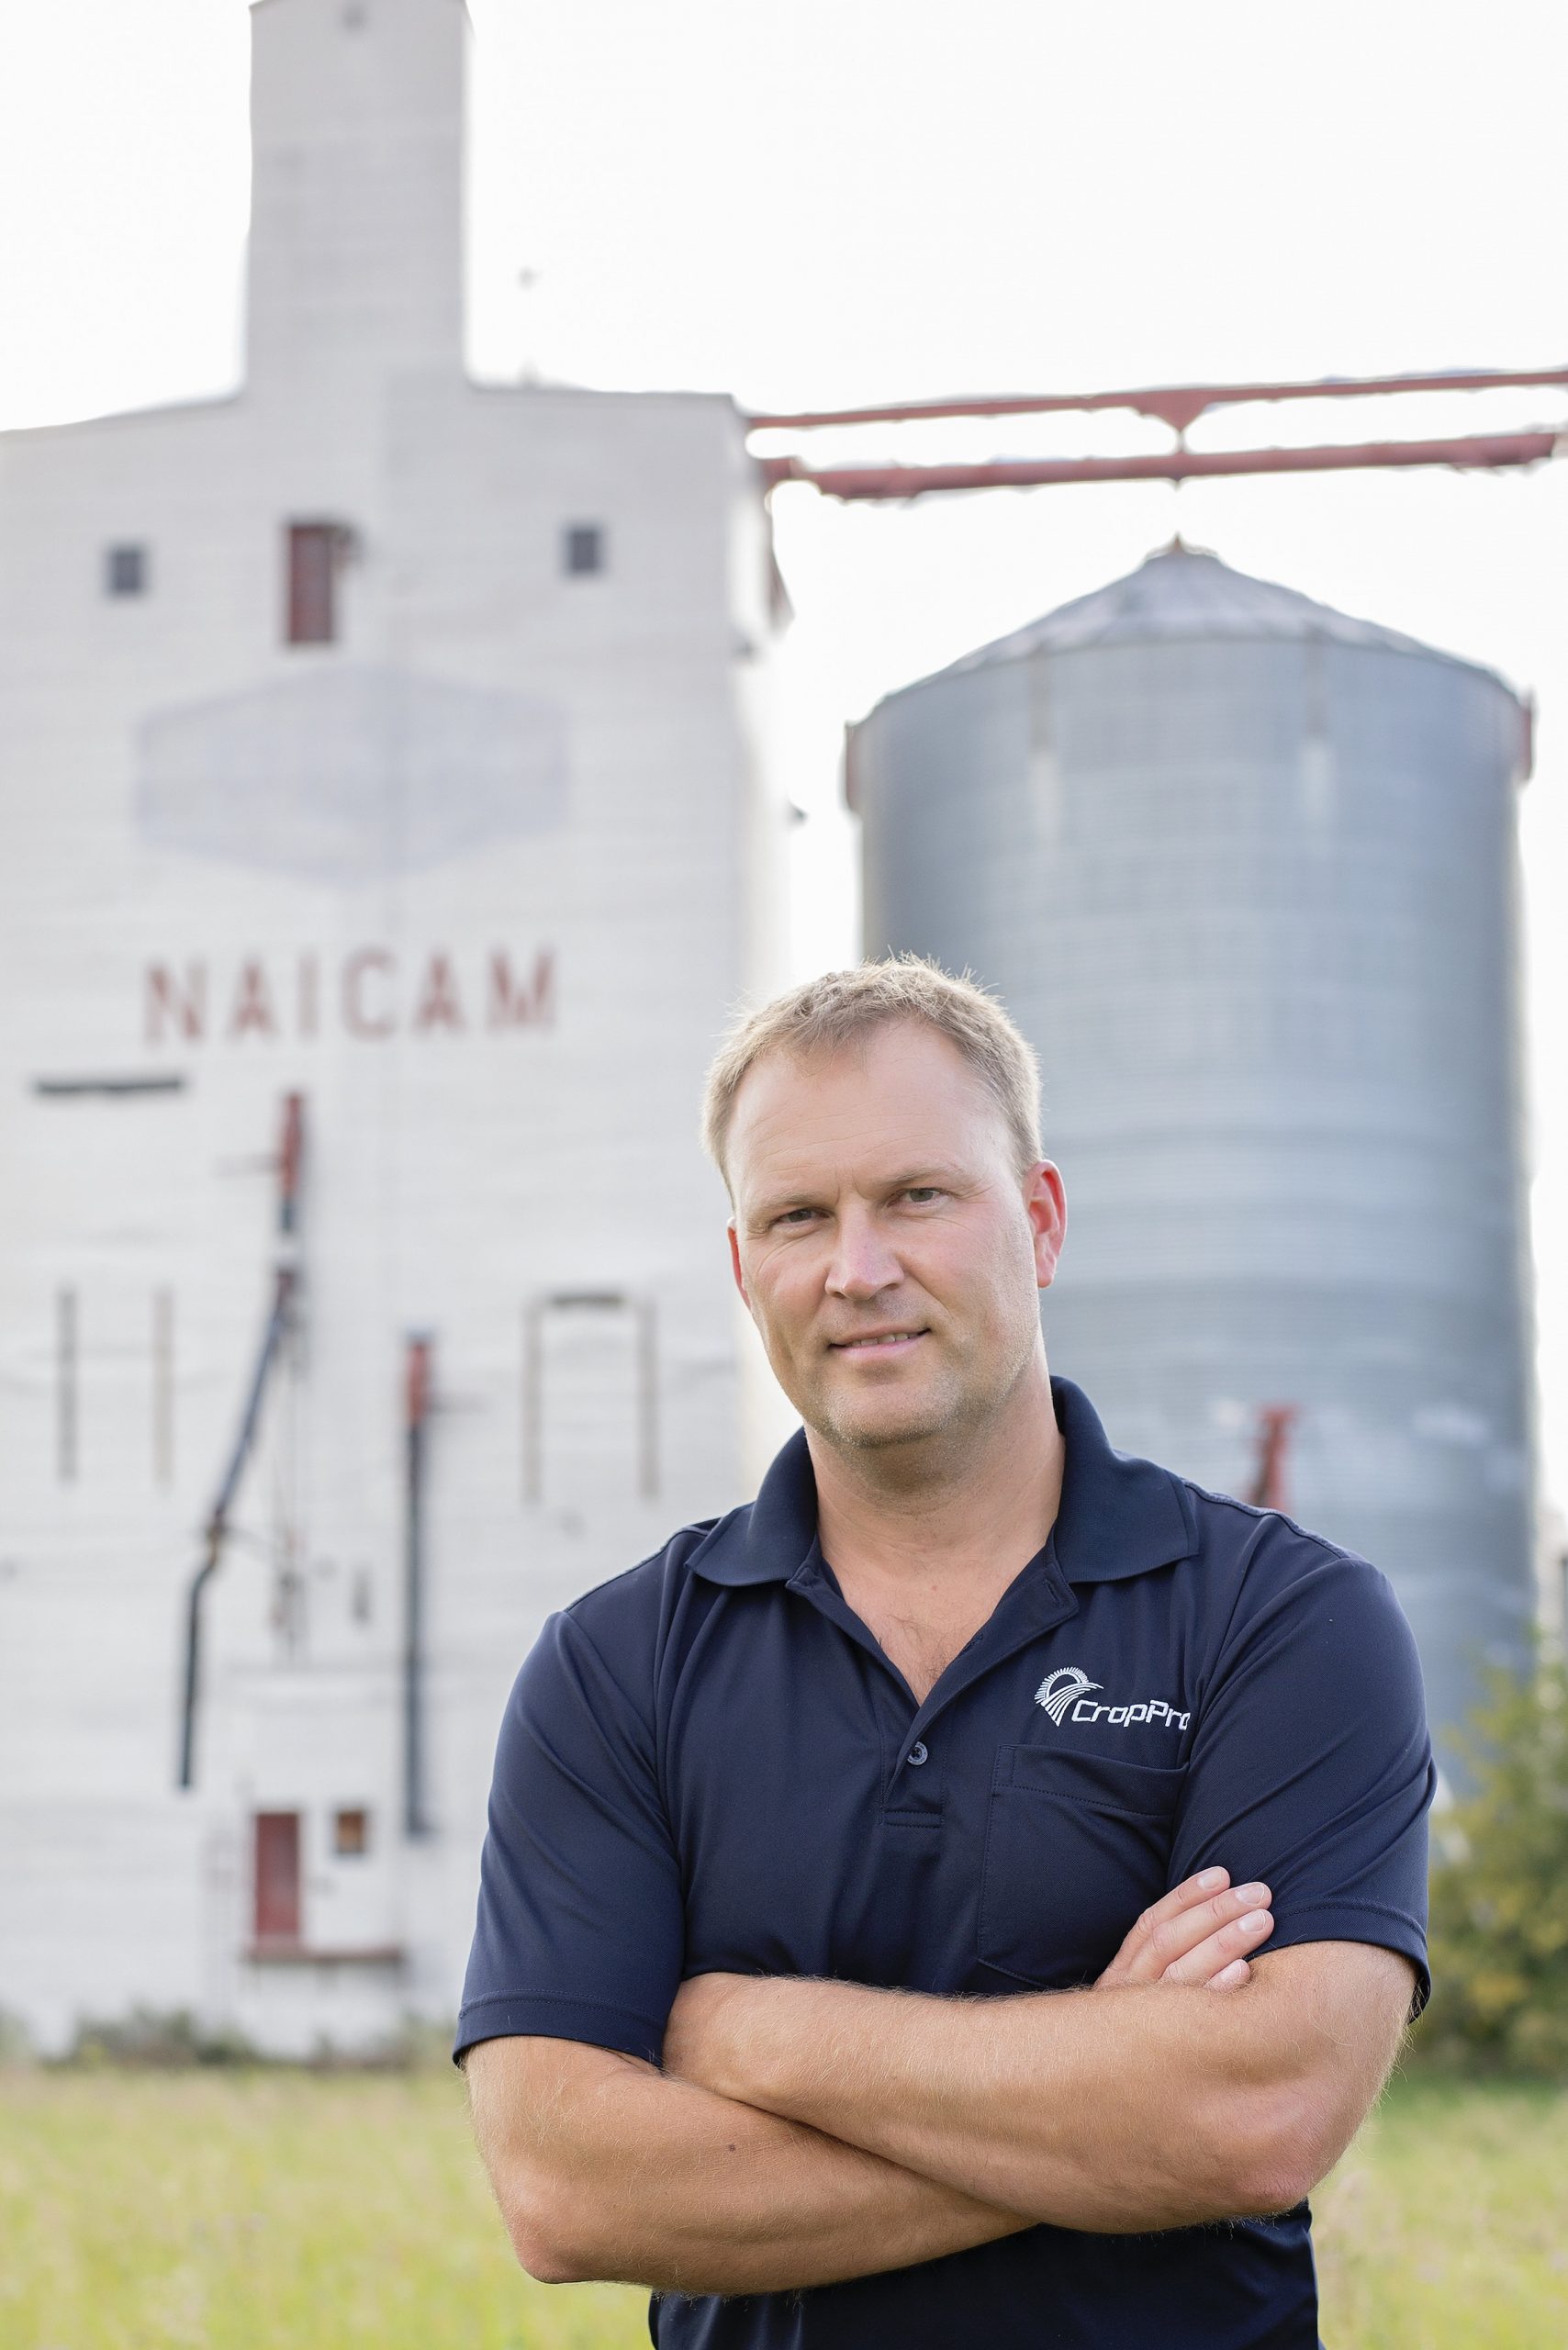 Cory Willness standing in front of a grain elevator.